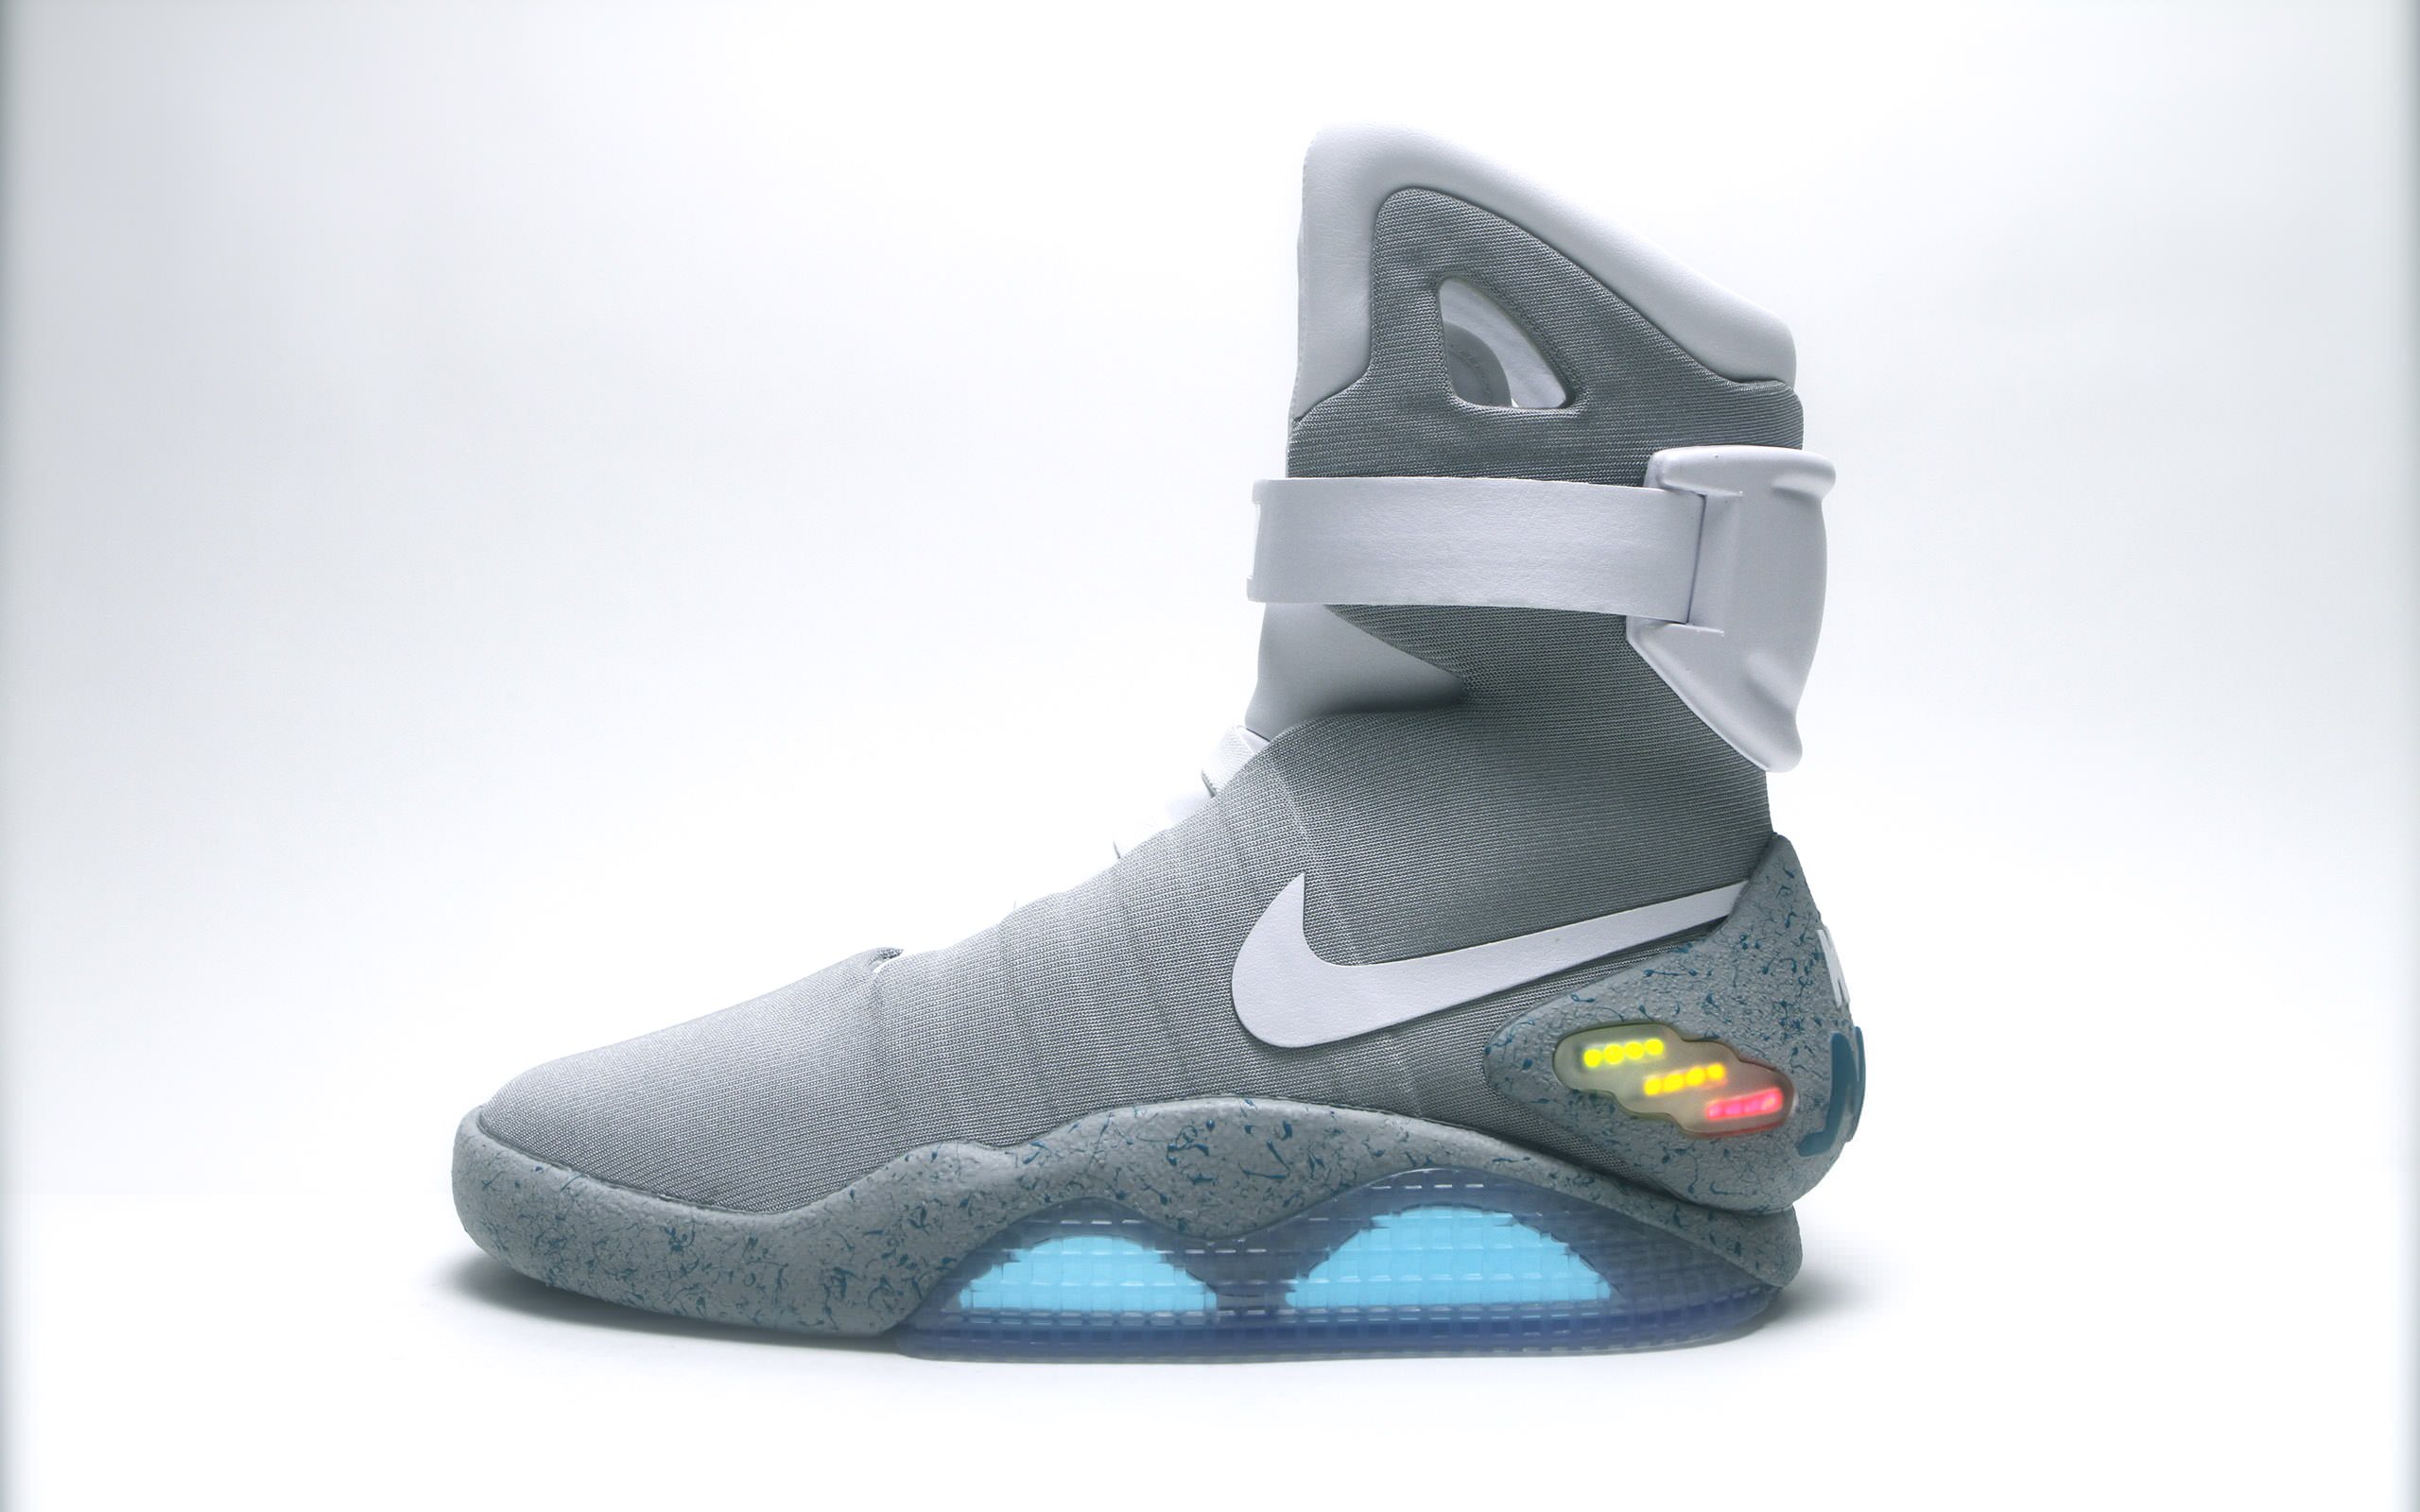 Nike designer says self-lacing 'Back to the Future' shoes will arrive in  2015 - The Verge